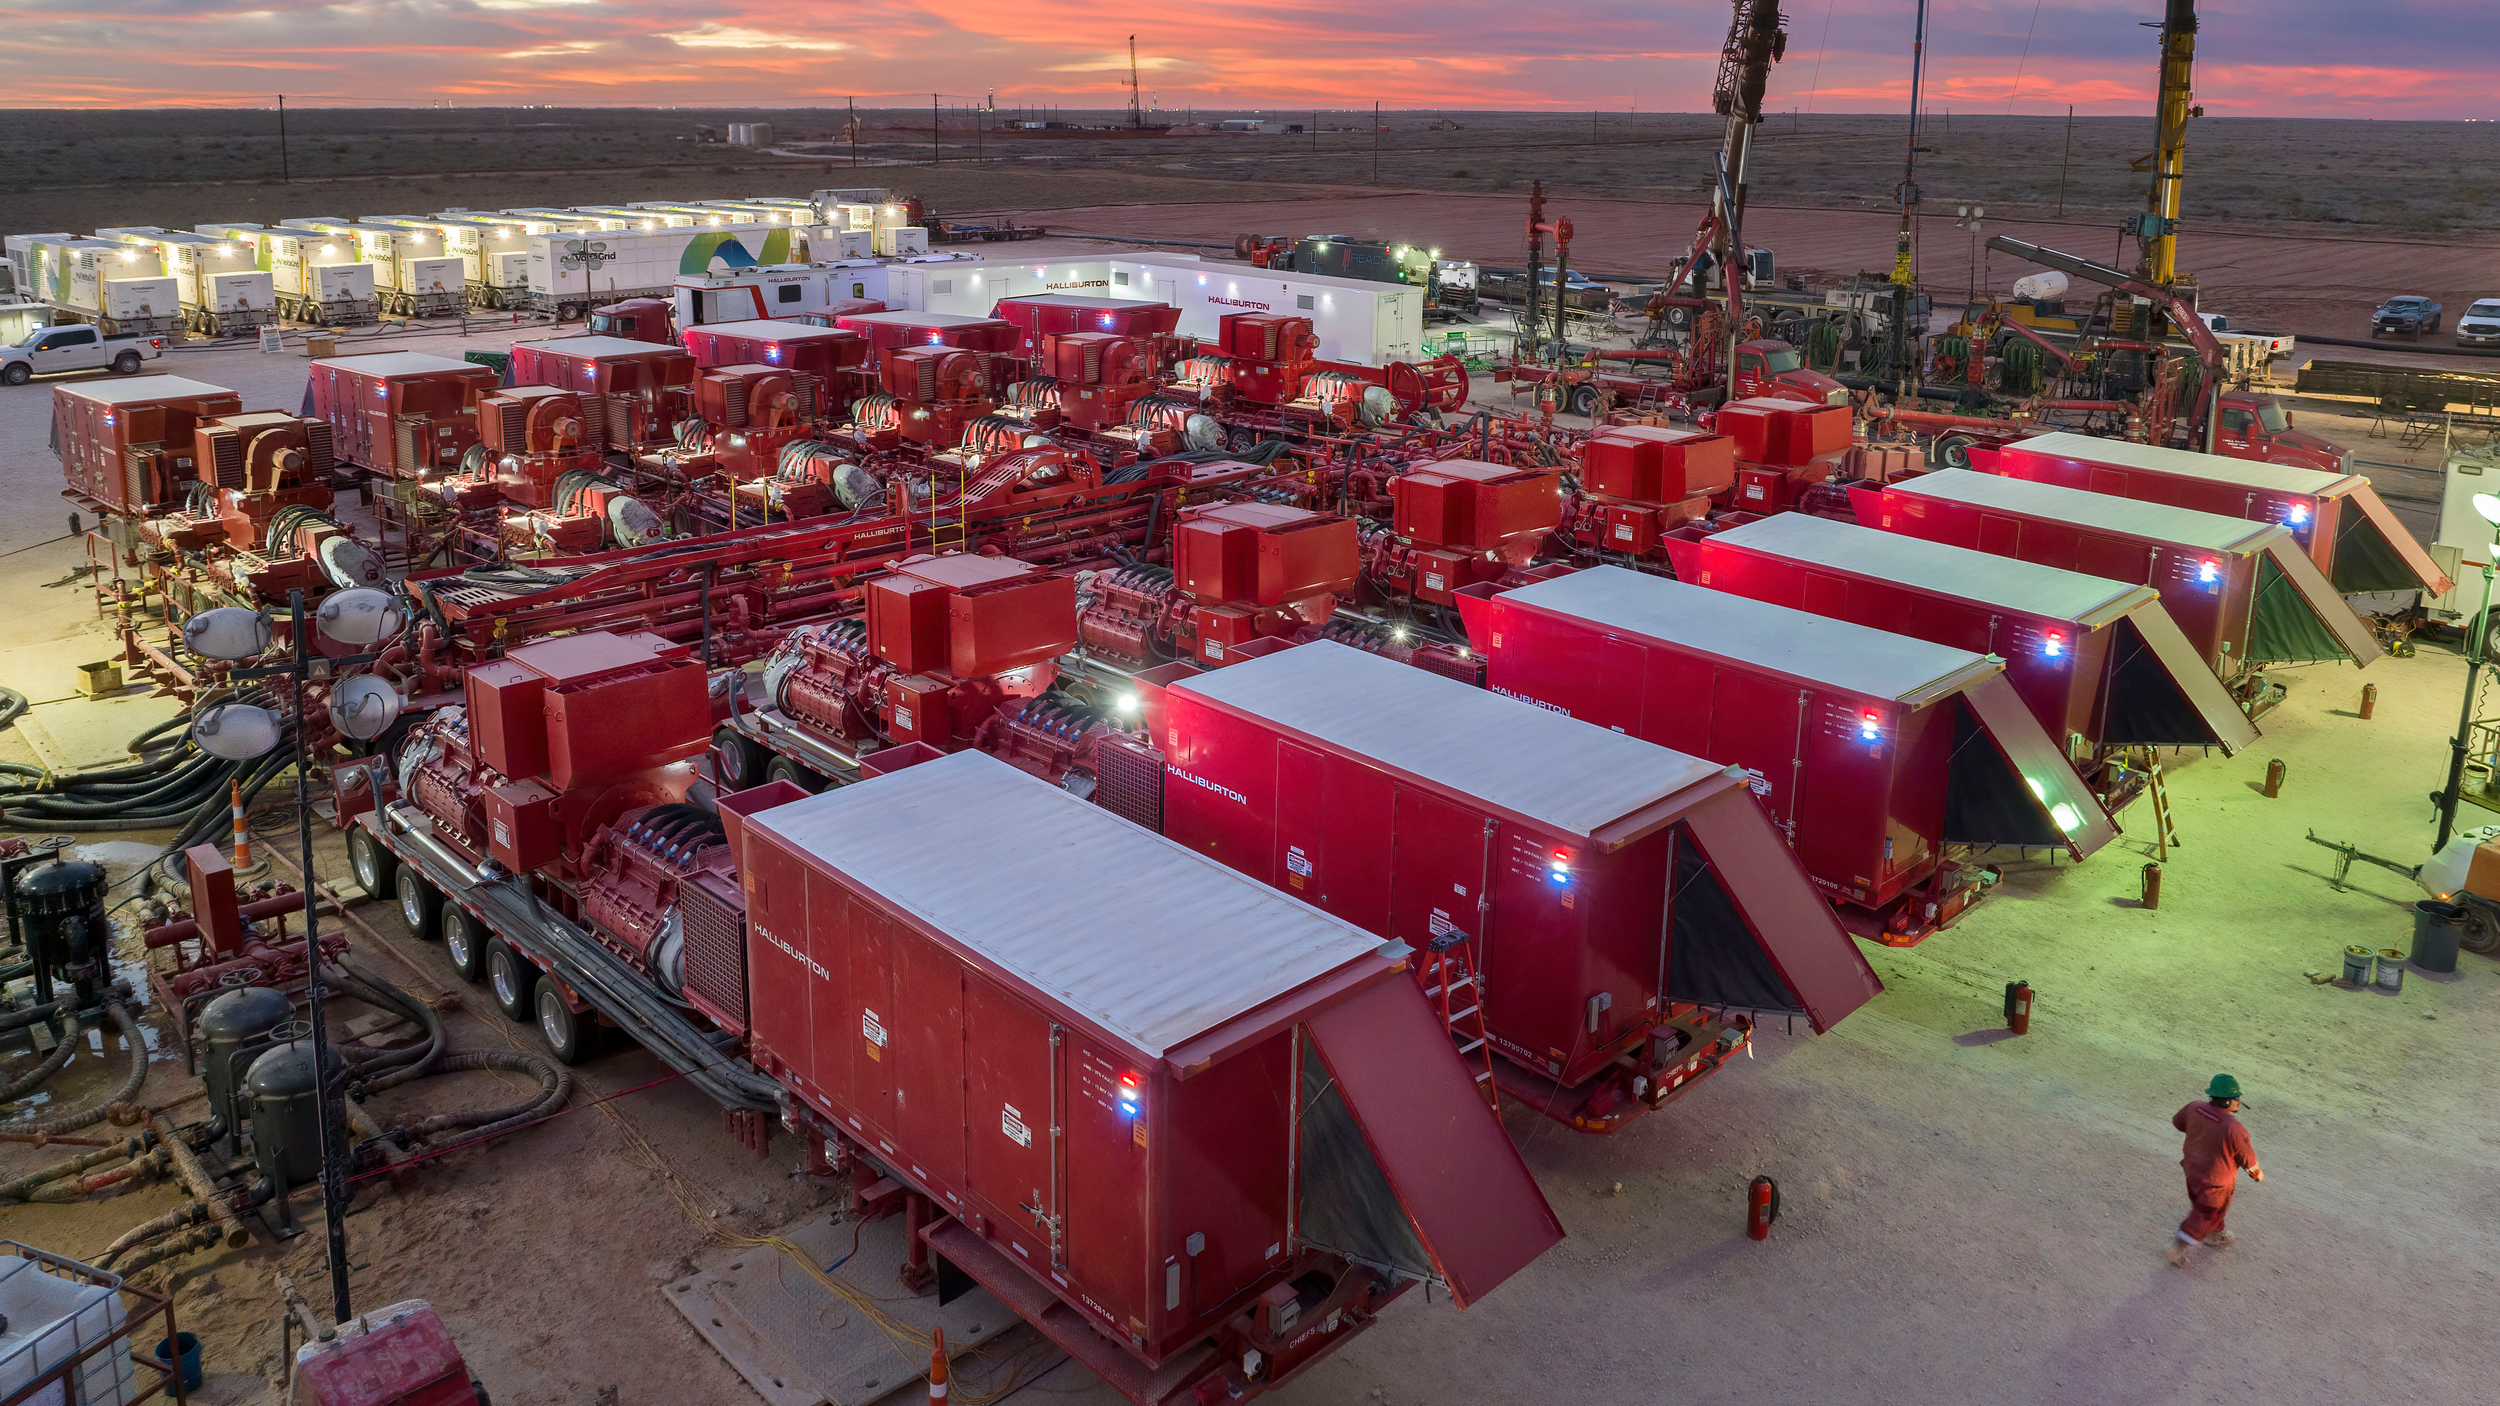 Powering a new era in hydraulic fracturing